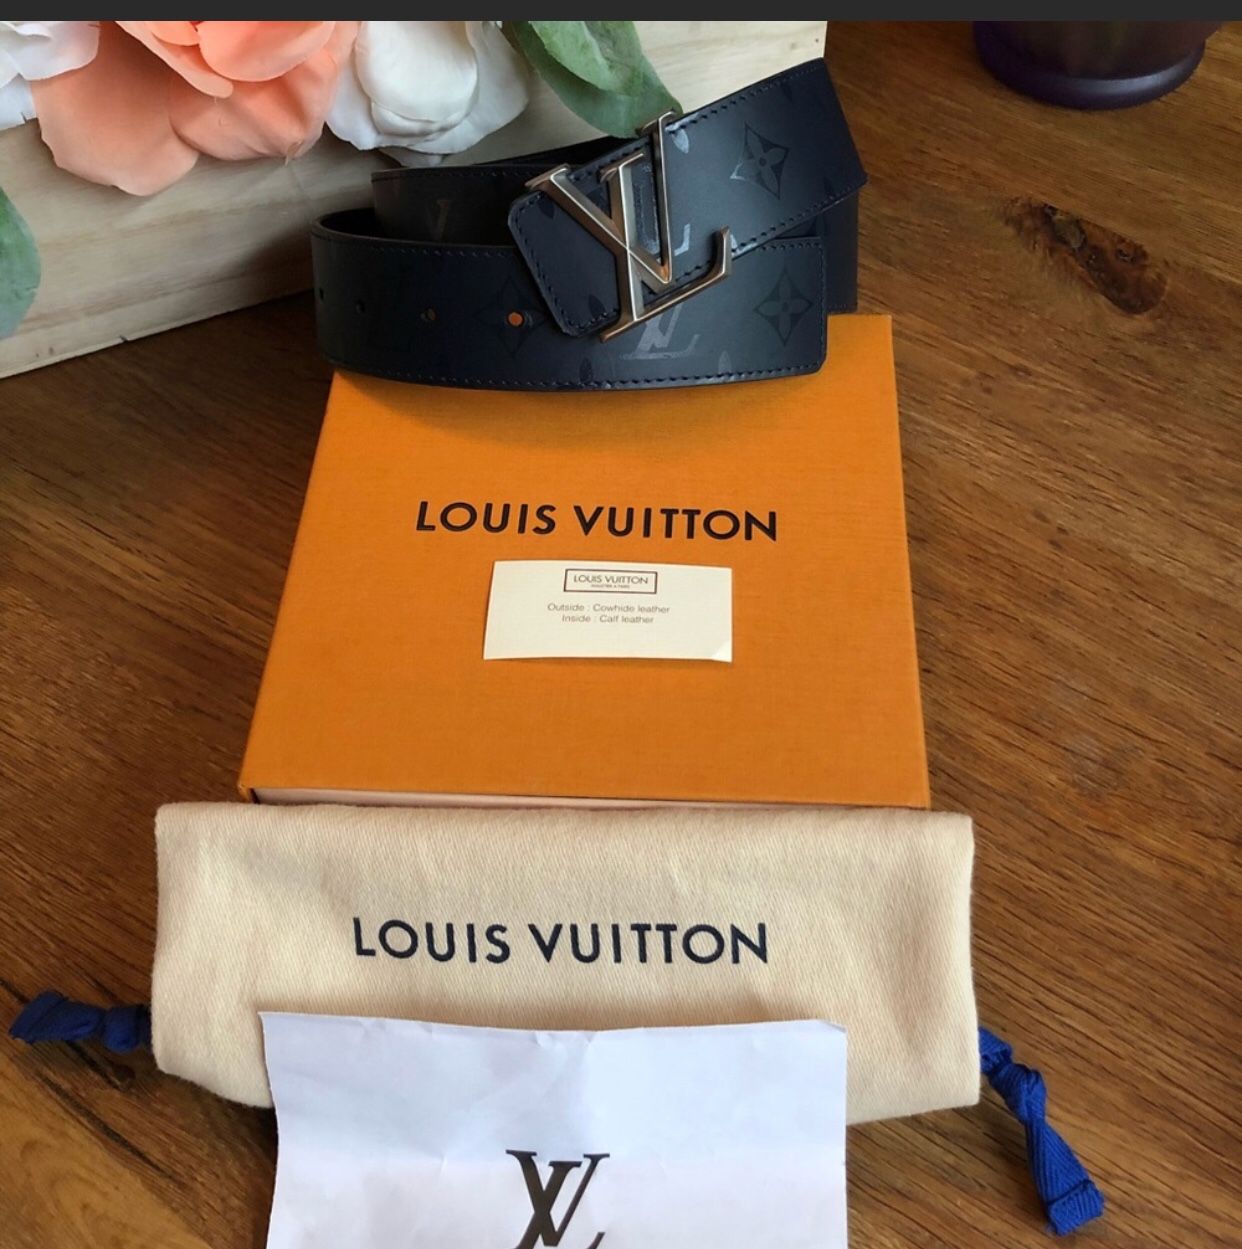 Louis Vuitton Pyramide Belt - 2 For Sale on 1stDibs